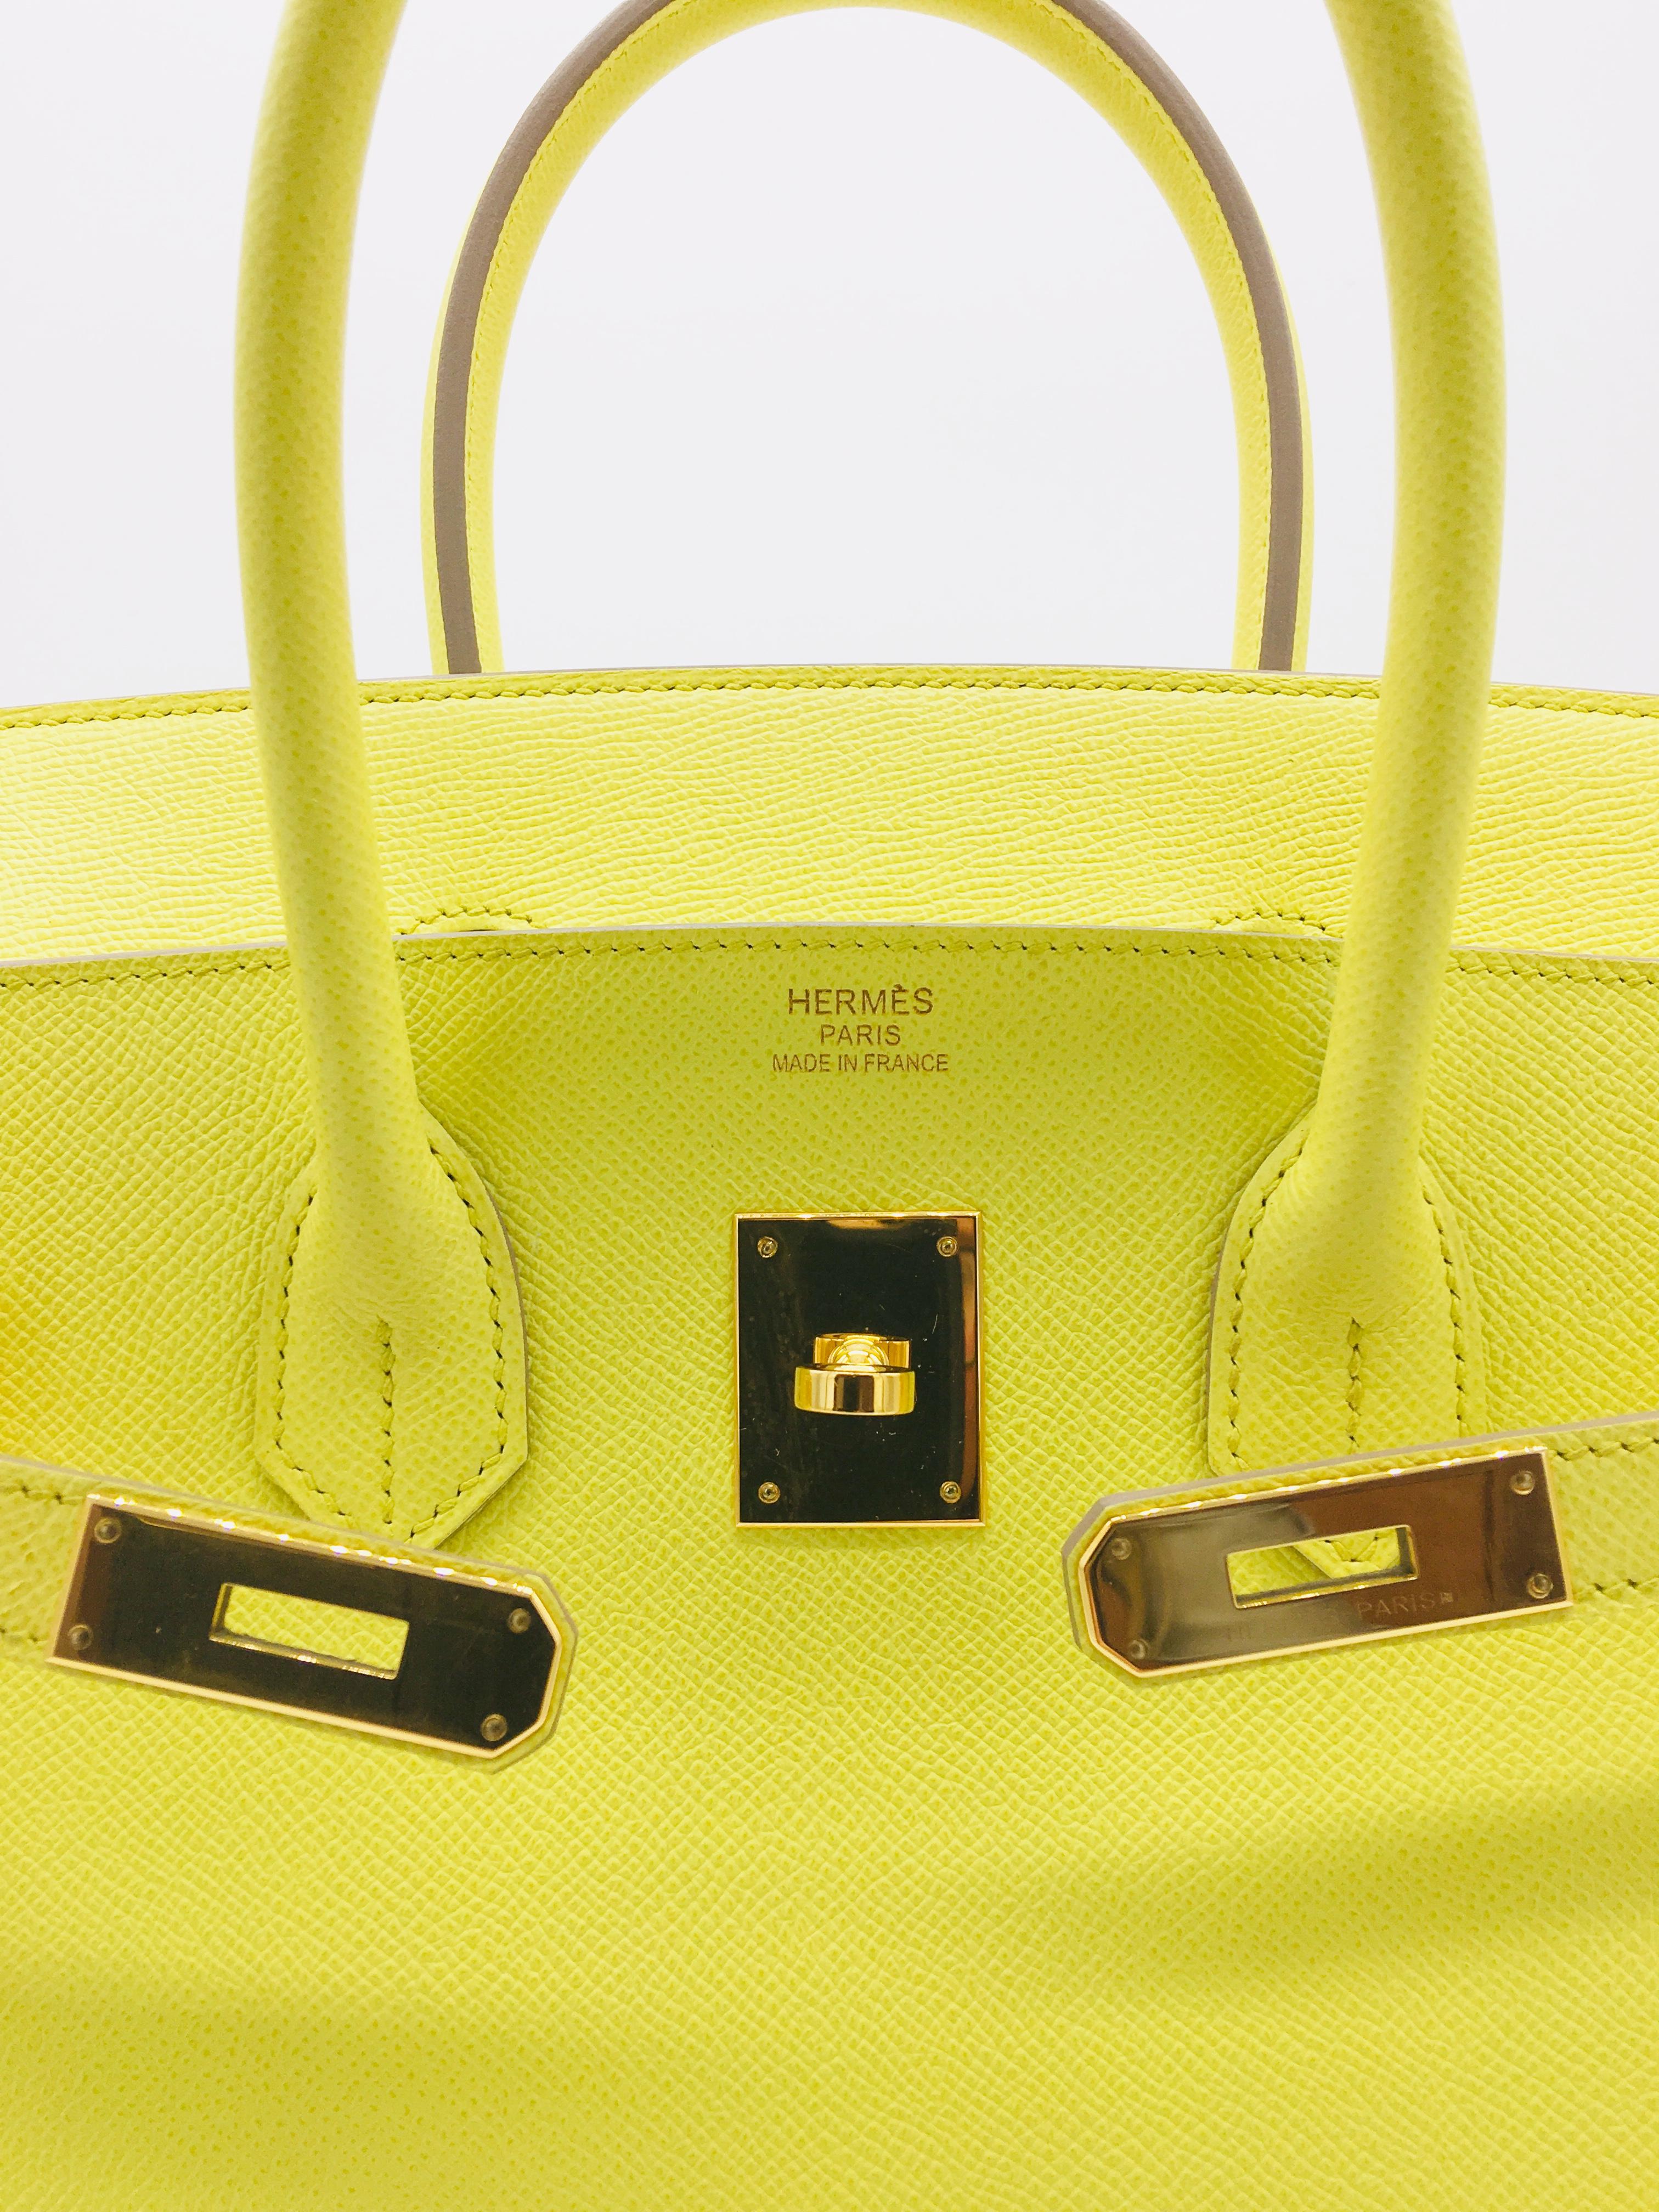 Soufre is a great colour for spring and summer, a lovely fresh yellow which is rarely seen these days.  This 35cm Preloved (2013) Birkin is in Epsom leather with Gold Hardware.  It is in good condition, we’d rate it at 8/10.  Full measurements are: 